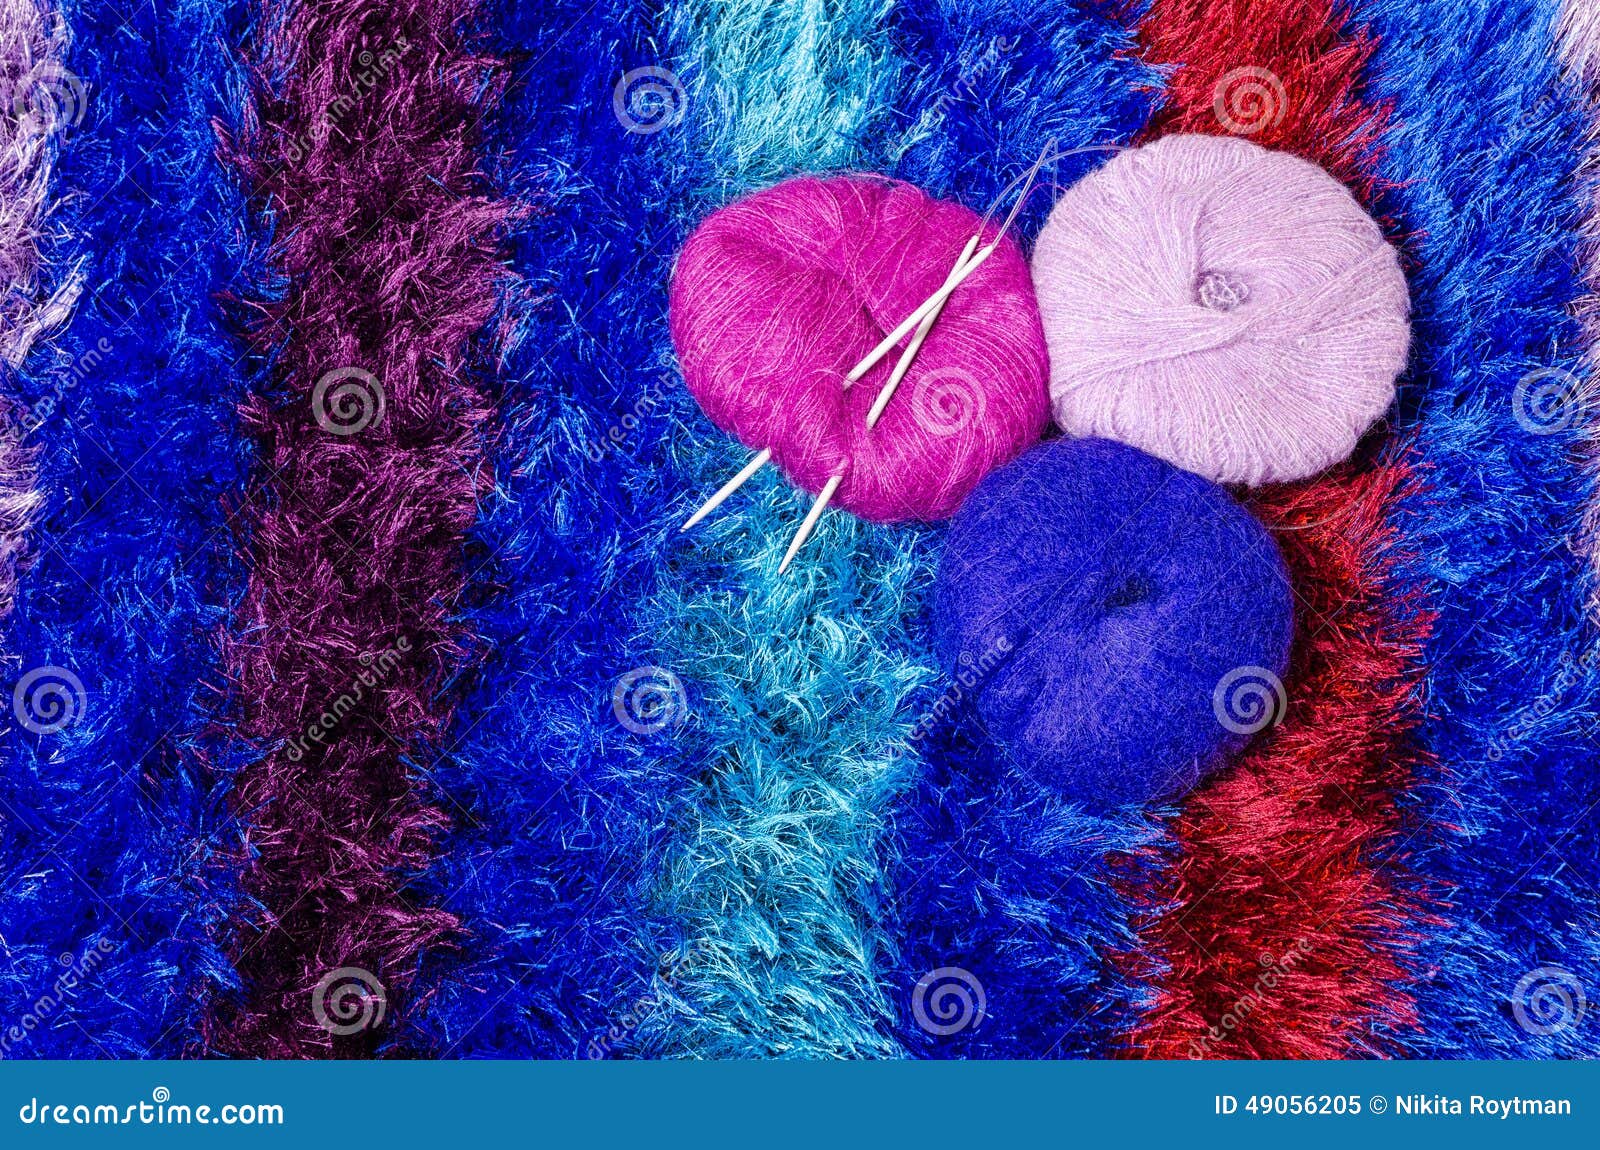 Yarn with Knitting Needles on Stripped Cloth Stock Image - Image of ...